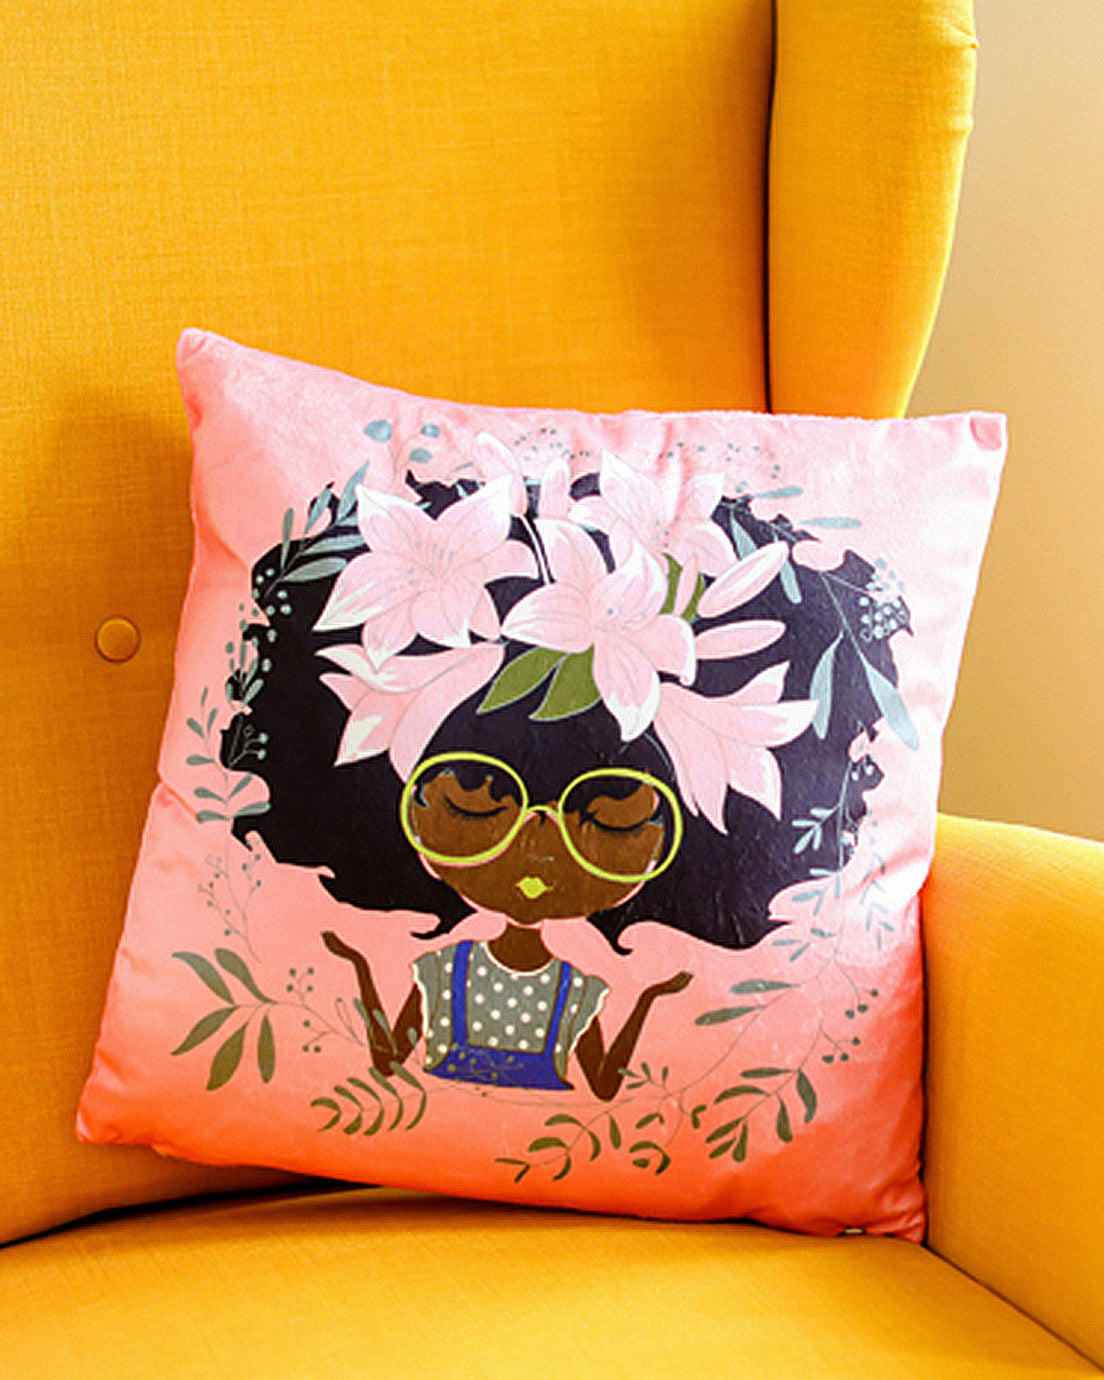 Lily Decorative Pillow